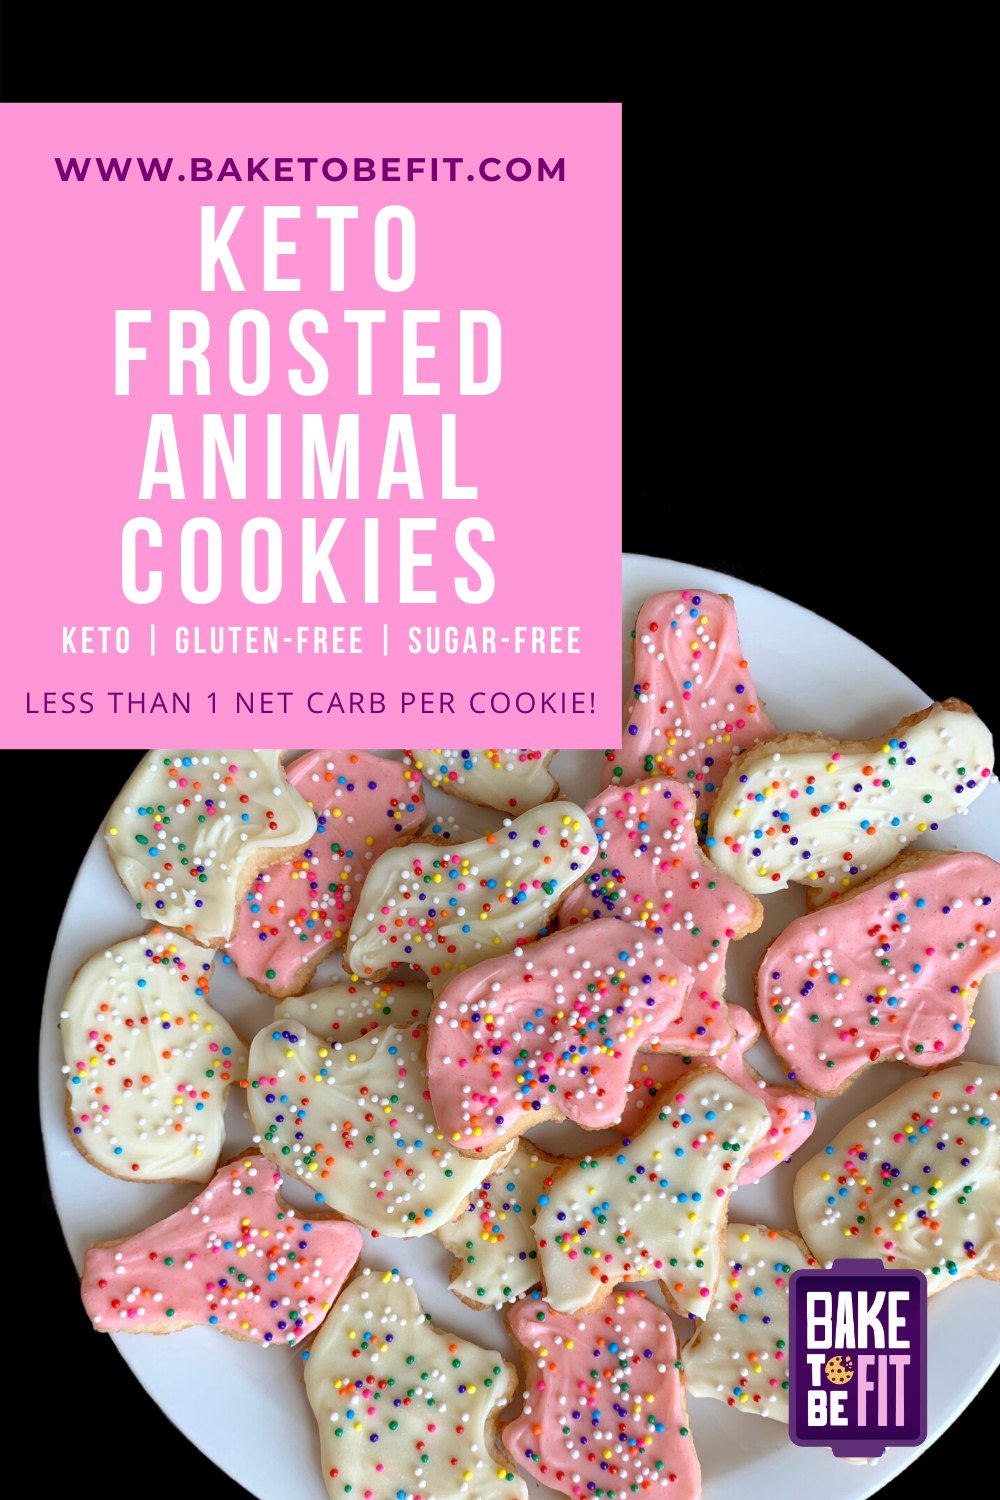 Keto frosted animal cookies